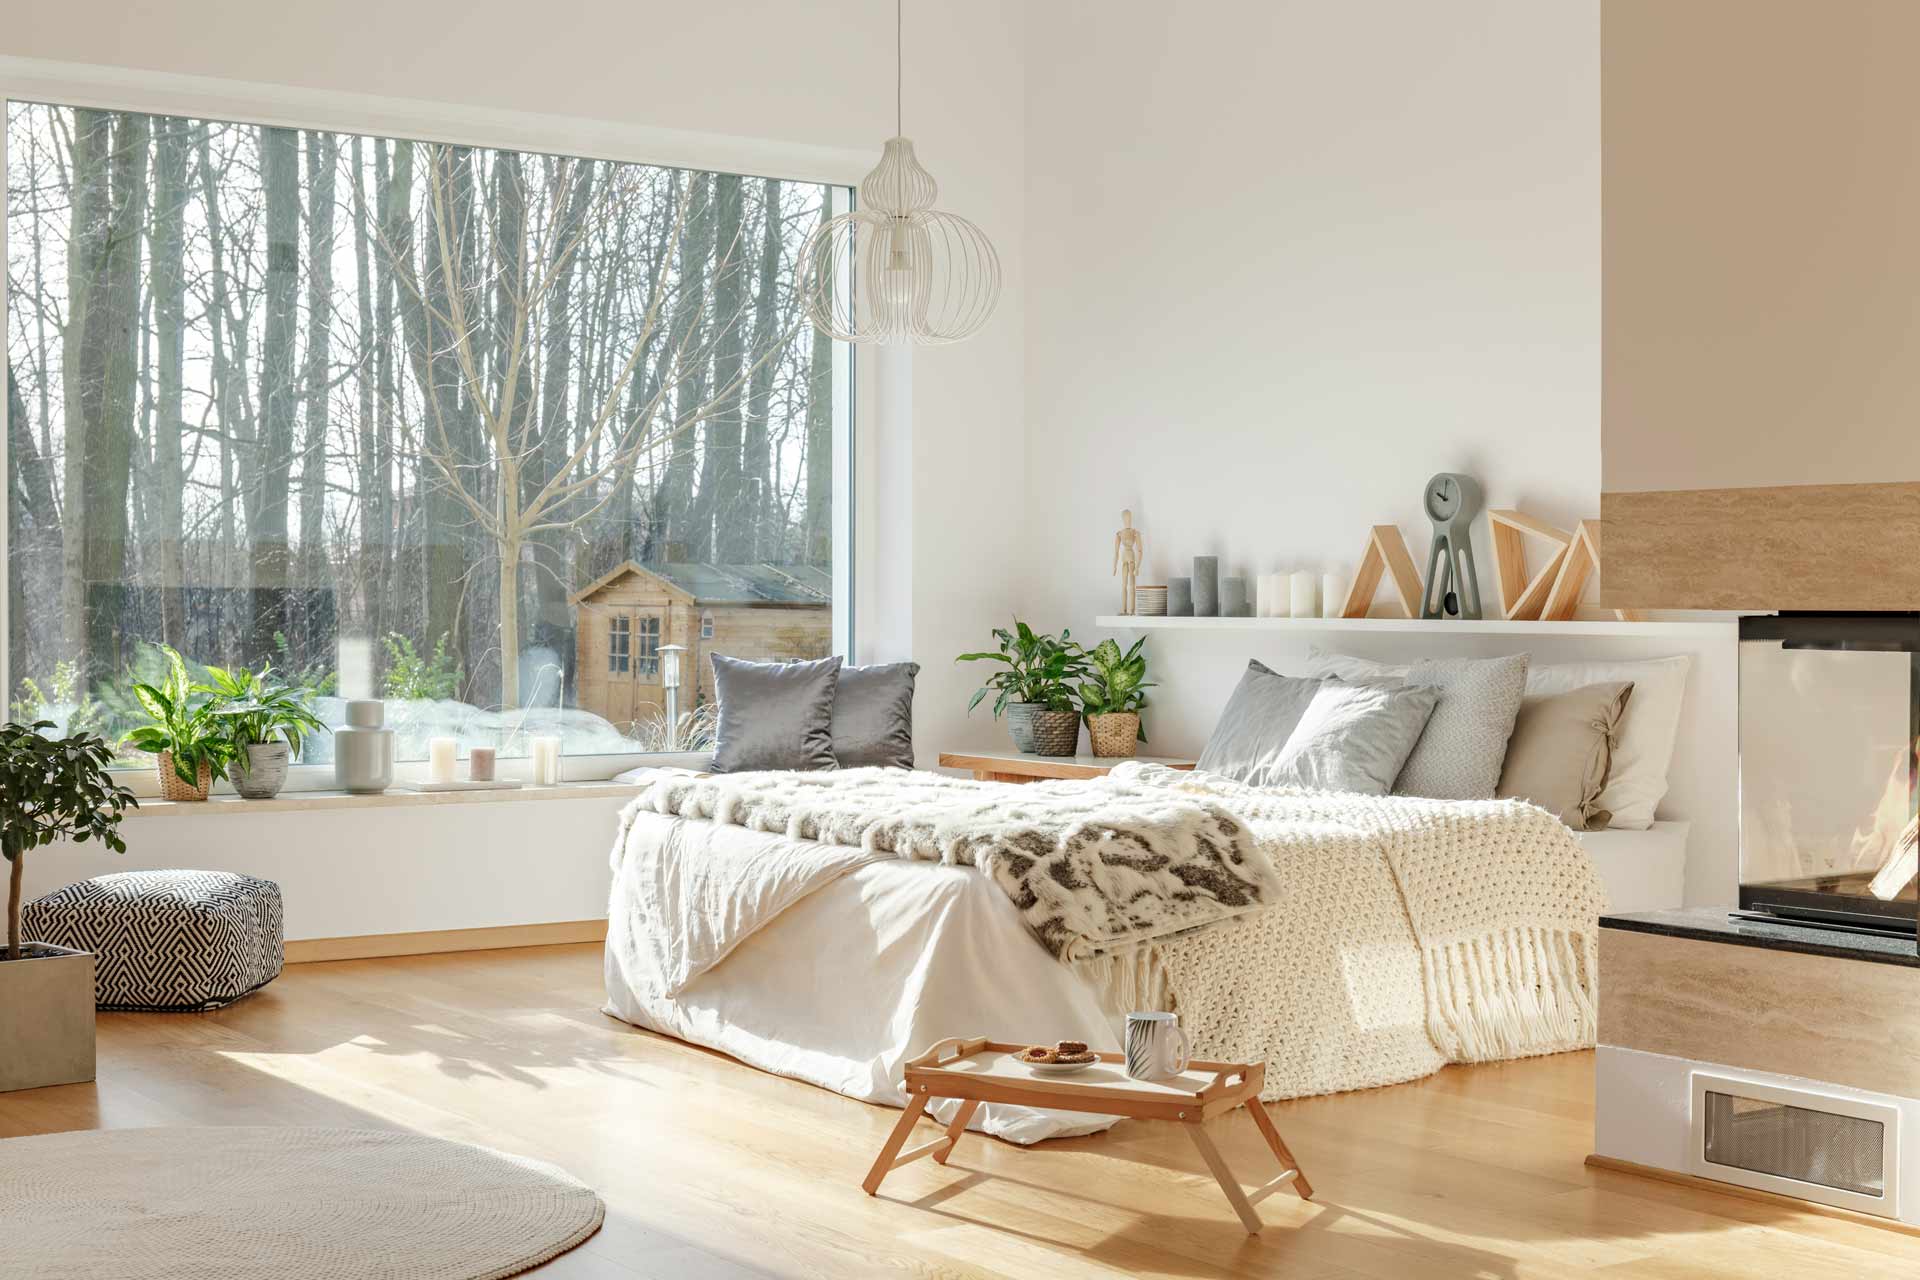 5 Ways To Increase Natural Light In My Home